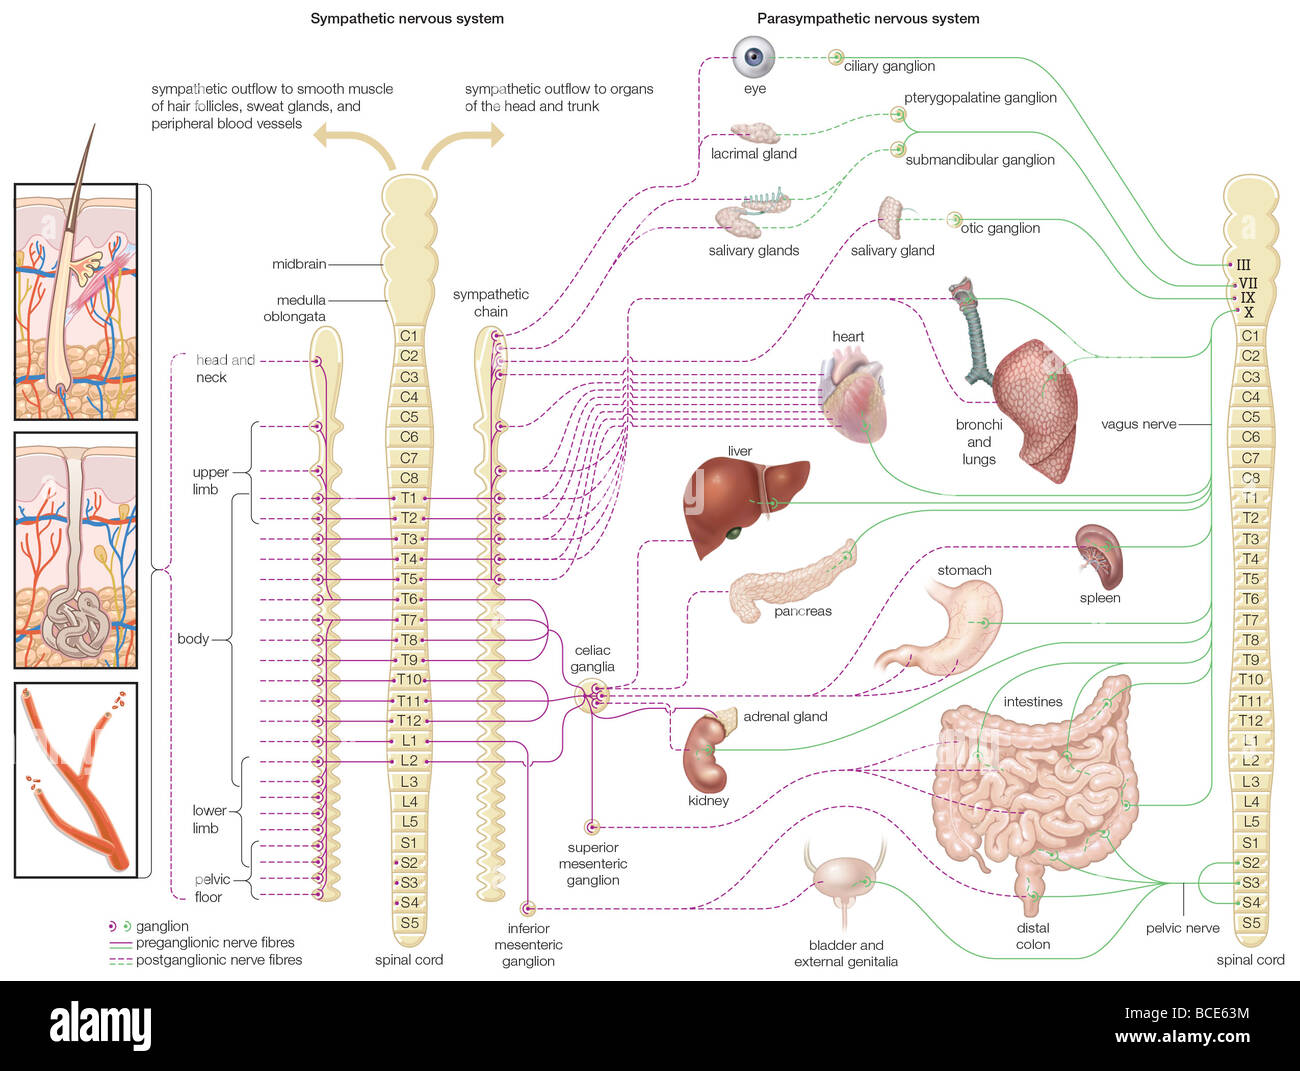 Diagram of the autonomic nervous system, showing distribution of sympathetic and parasympathetic nerves to the human body. Stock Photo